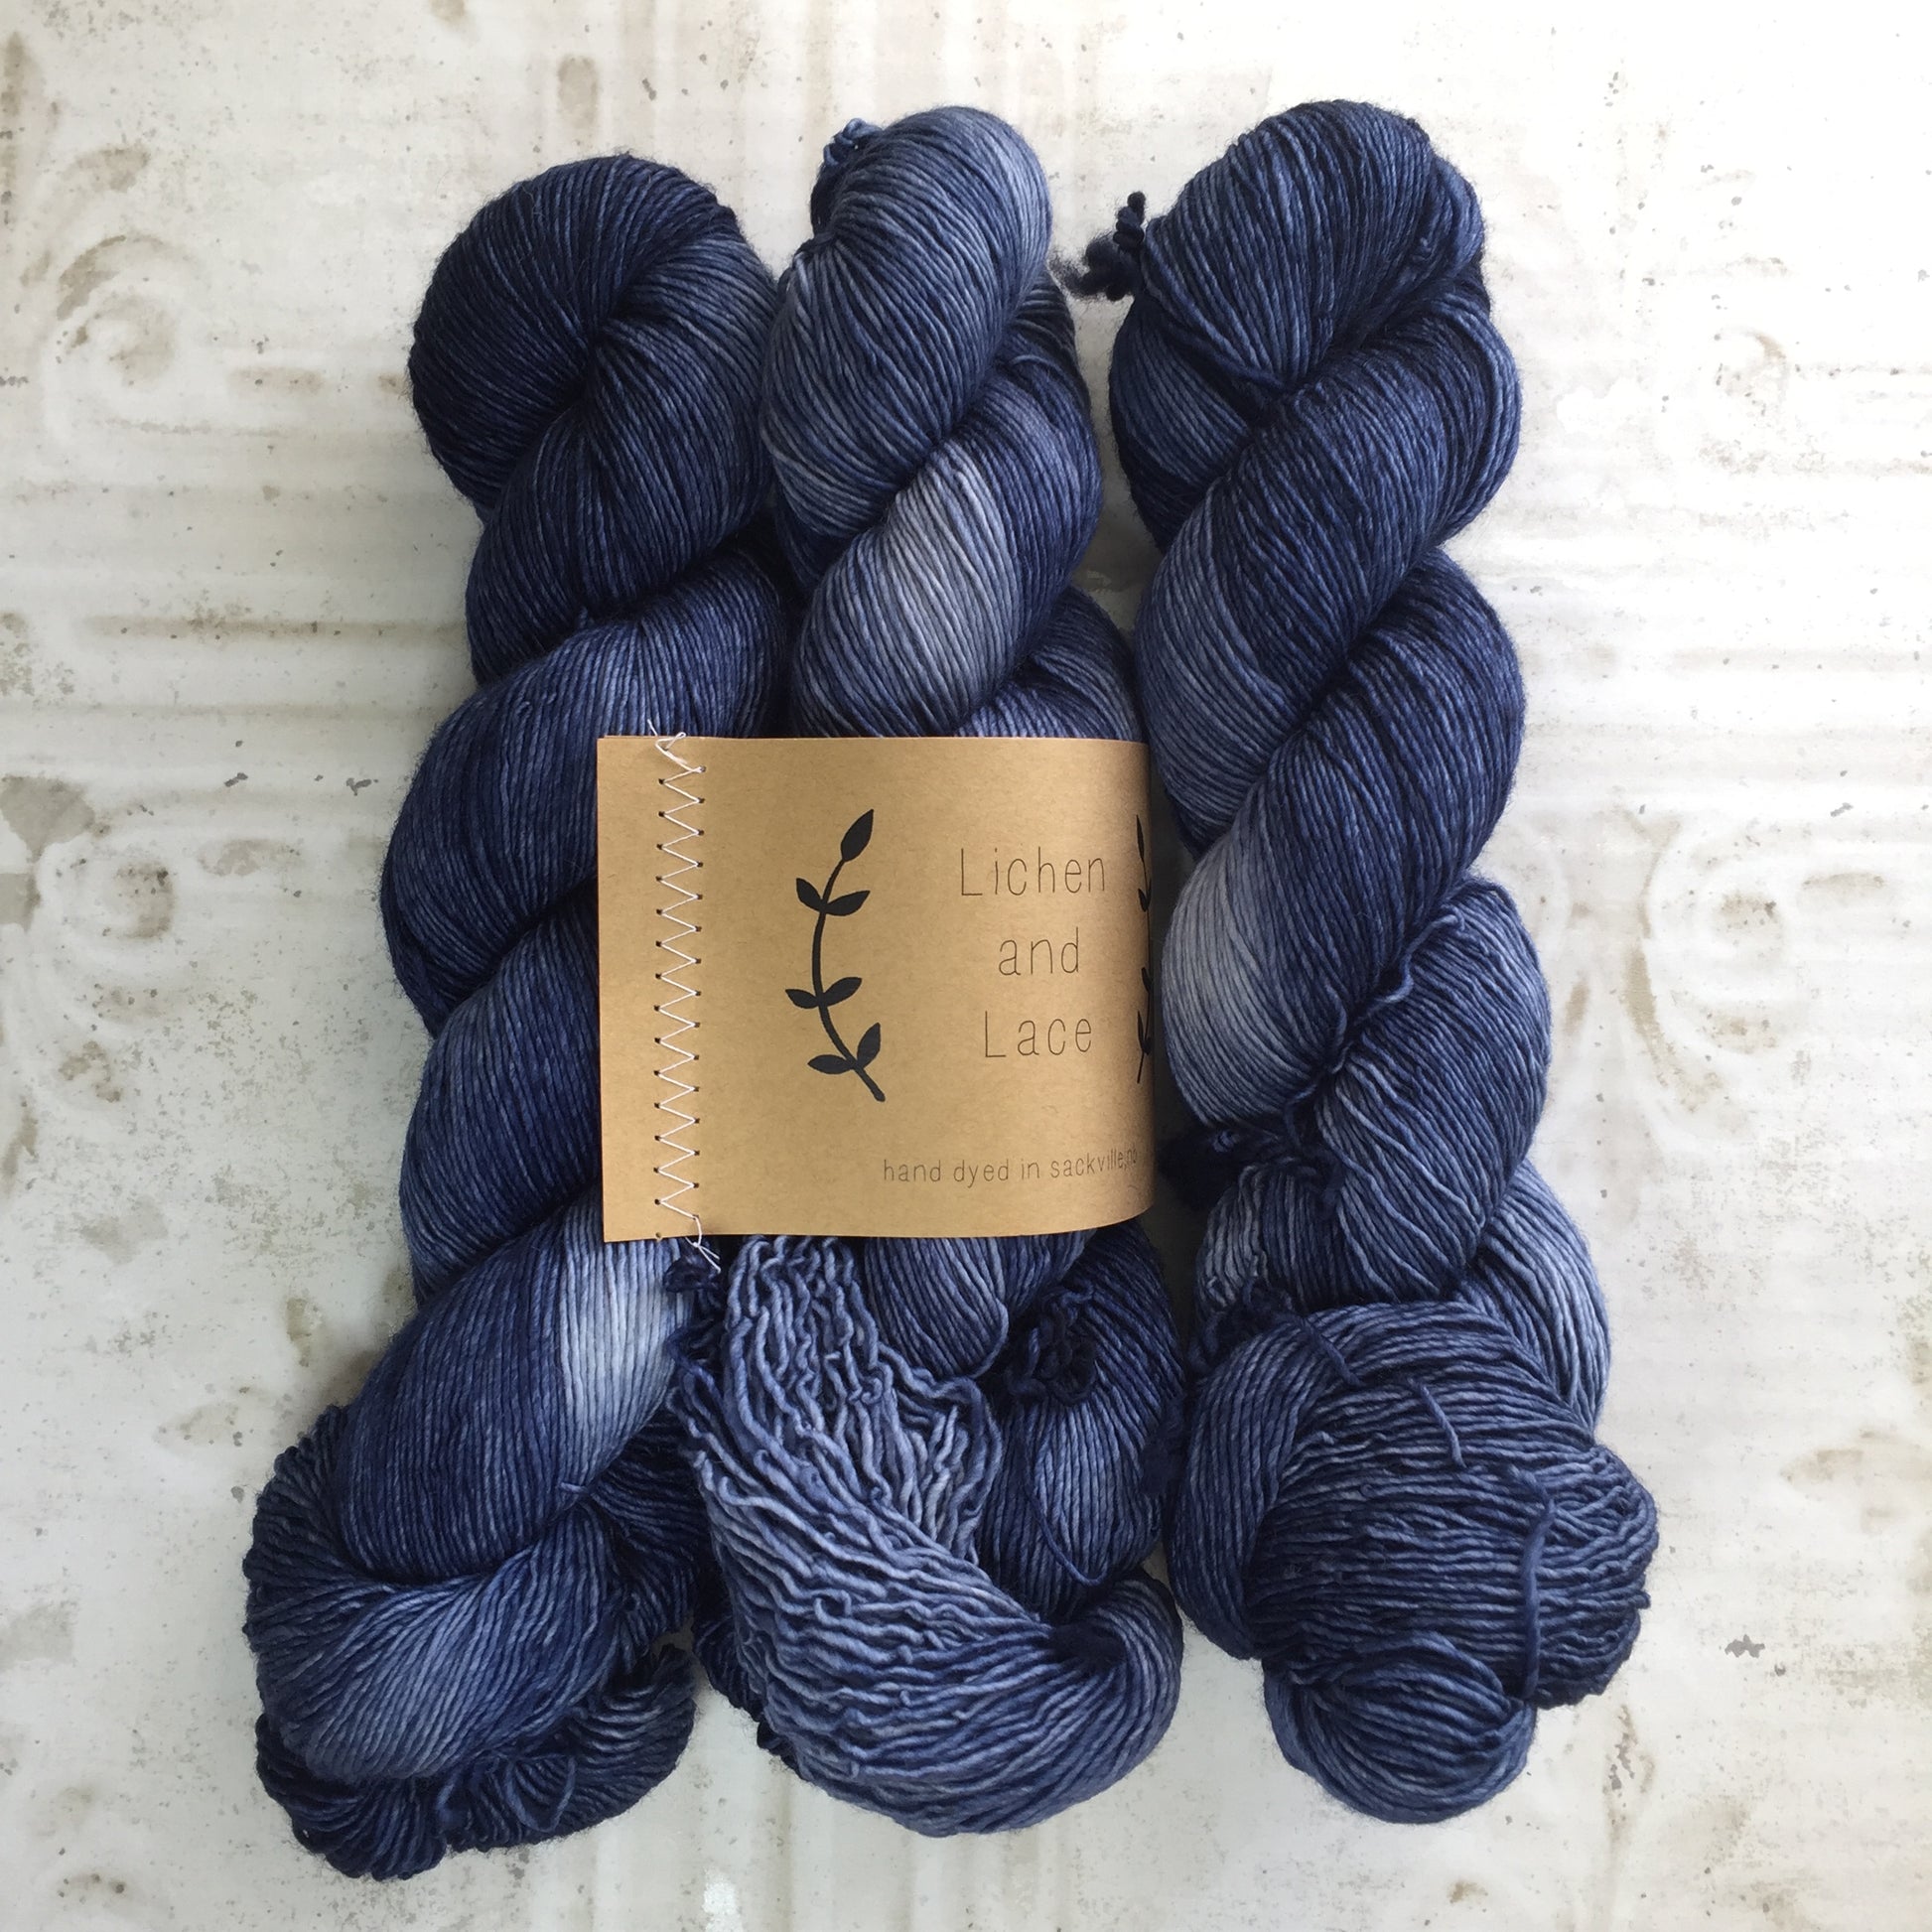 Lichen and Lace Hand Dyed Yarn